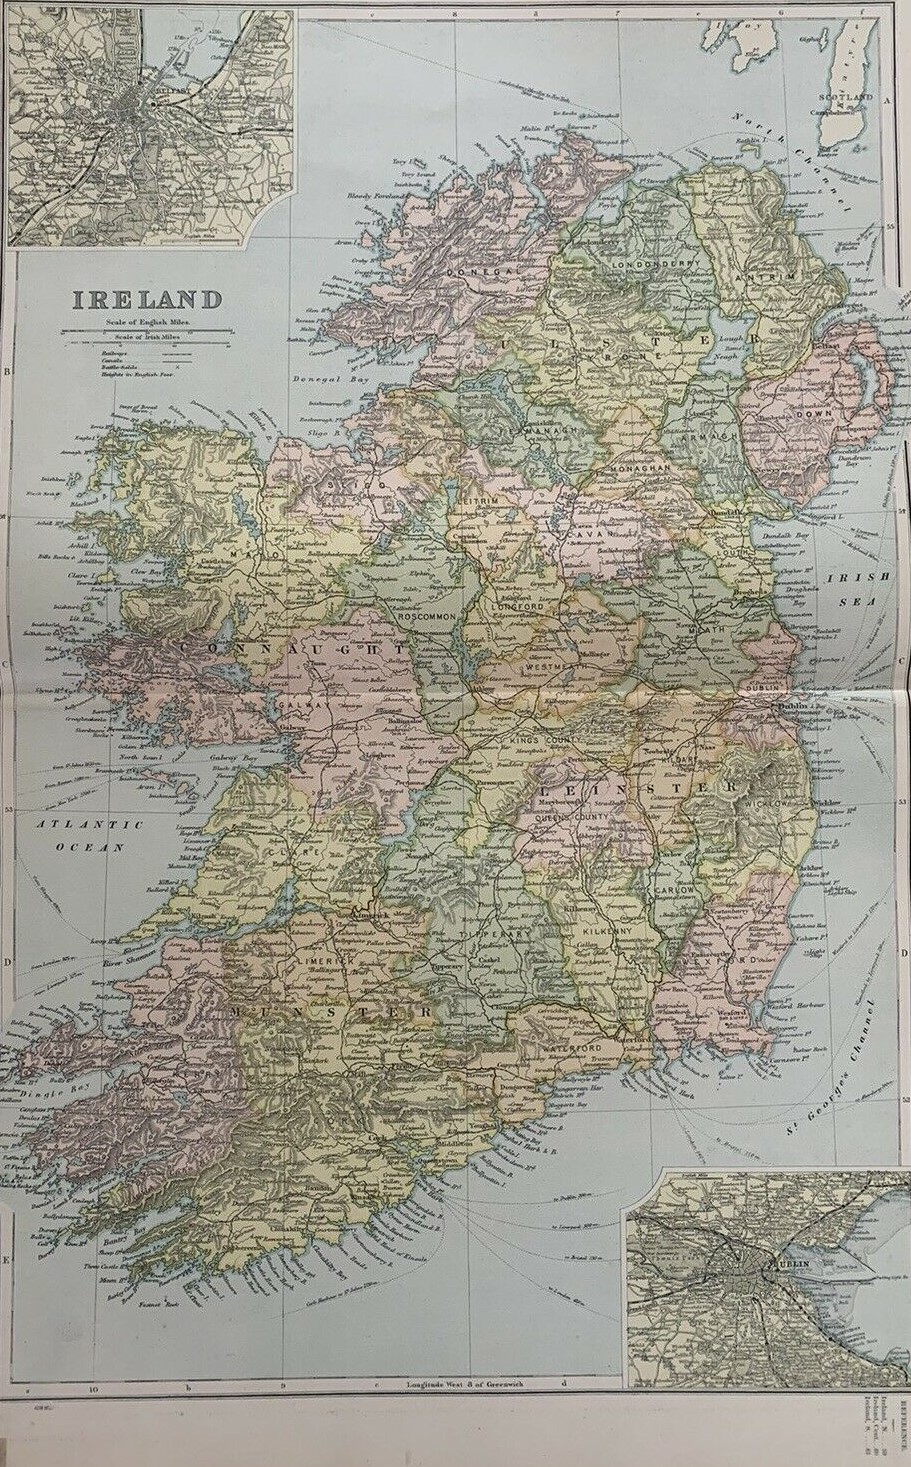 Ireland 32 Counties Large Coloured Victorian Map GW Bacon 1899.